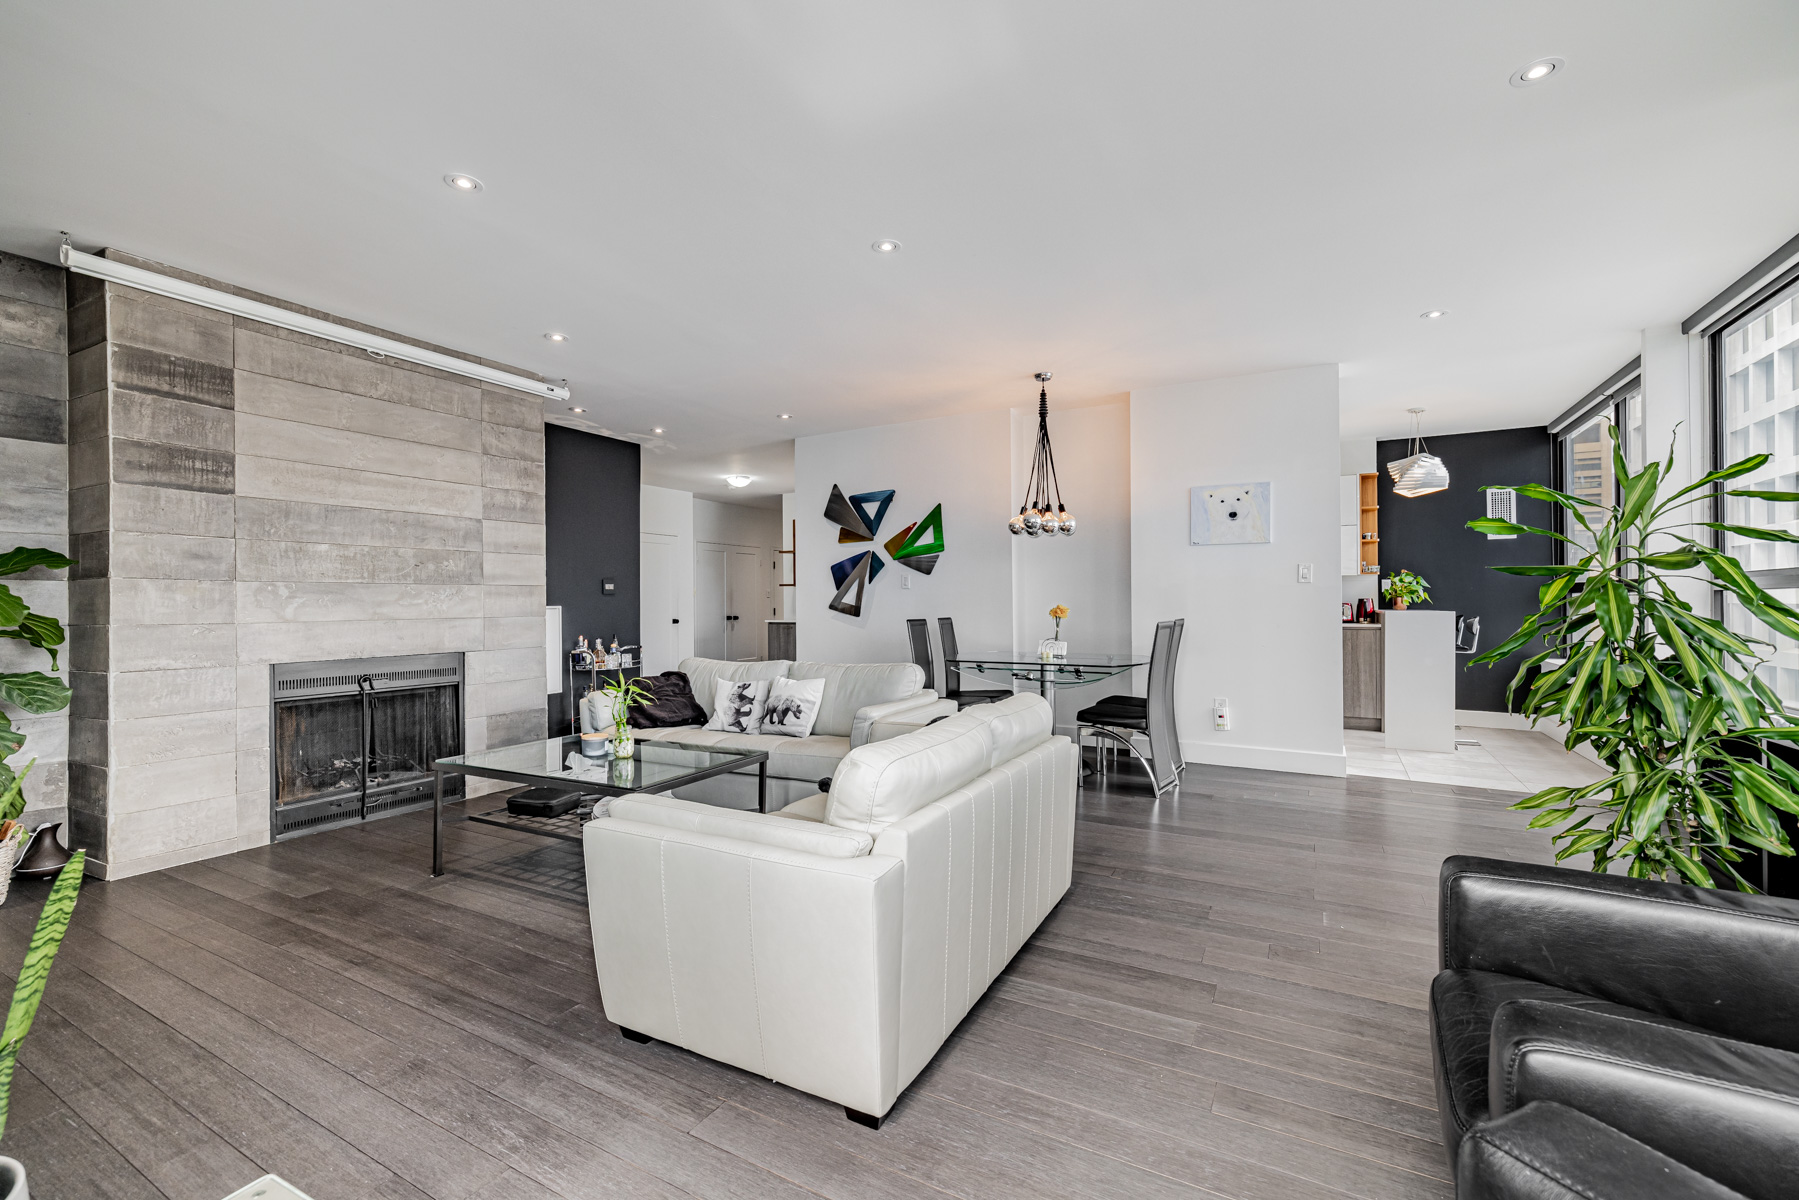 Condo penthouse with modern design and furniture – 280 Simcoe St Ph-09.